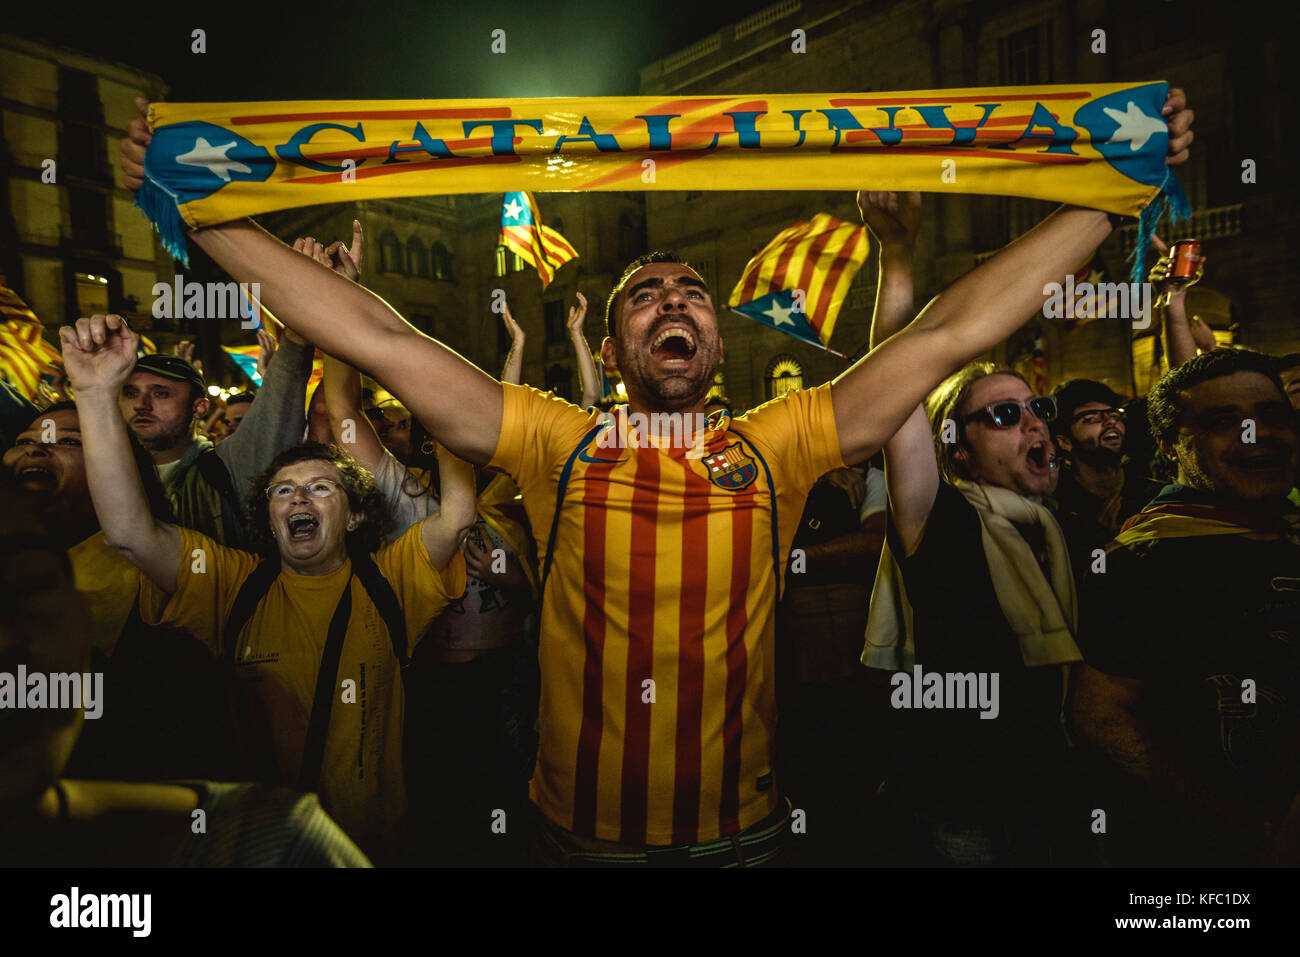 Barcelona, Spain. 27 October, 2017:  A Catalan separatist holds a scarf as he celebrates the parliaments independence vote in front of the 'Generalitat' shouting slogans Credit: Matthias Oesterle/Alamy Live News Stock Photo